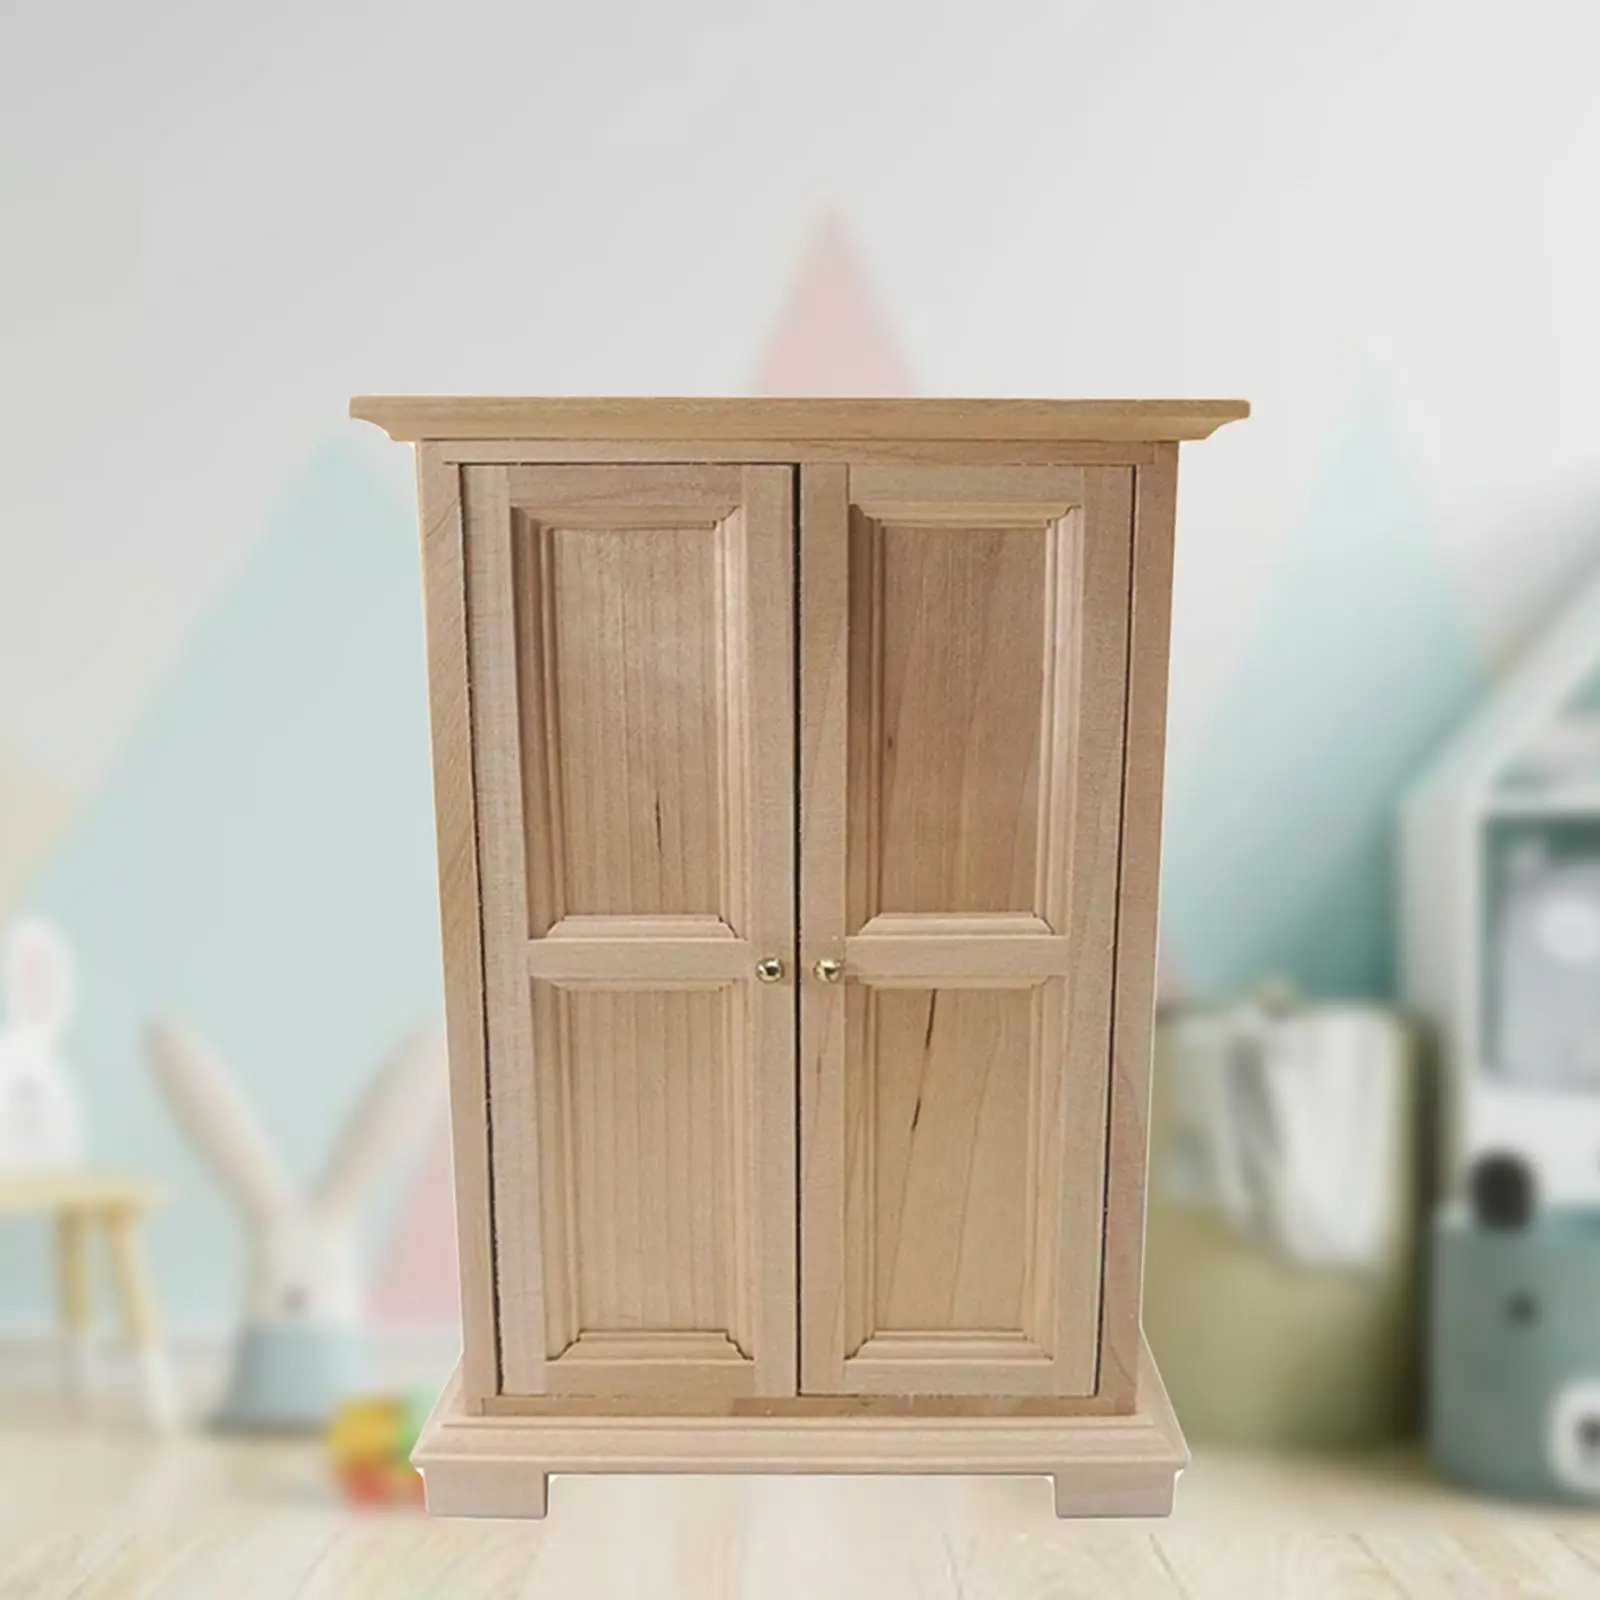 1/12 Scale Dollhouse Wooden Wardrobe Accessory Toy for Bedroom Doll House